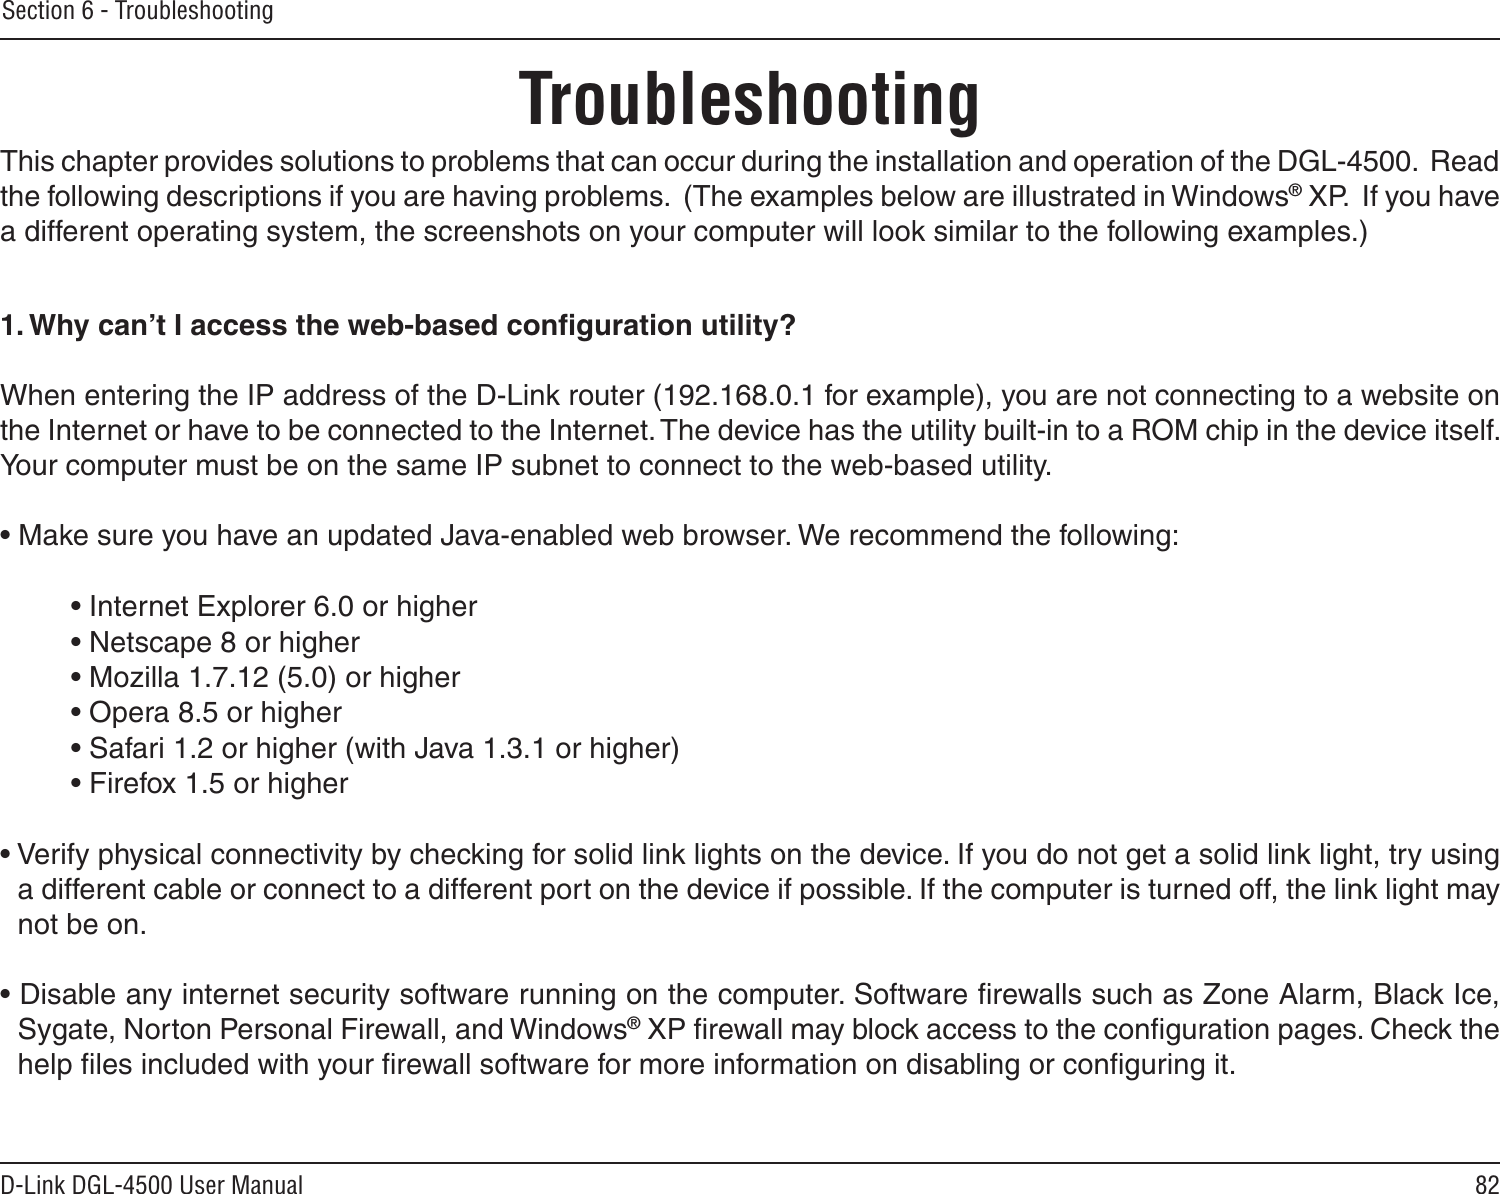 82D-Link DGL-4500 User ManualSection 6 - TroubleshootingTroubleshootingThis chapter provides solutions to problems that can occur during the installation and operation of the DGL-4500.  Read the following descriptions if you are having problems.  (The examples below are illustrated in Windows® XP.  If you have a different operating system, the screenshots on your computer will look similar to the following examples.)1. Why can’t I access the web-based conﬁguration utility?When entering the IP address of the D-Link router (192.168.0.1 for example), you are not connecting to a website on the Internet or have to be connected to the Internet. The device has the utility built-in to a ROM chip in the device itself. Your computer must be on the same IP subnet to connect to the web-based utility. • Make sure you have an updated Java-enabled web browser. We recommend the following: • Internet Explorer 6.0 or higher • Netscape 8 or higher • Mozilla 1.7.12 (5.0) or higher • Opera 8.5 or higher • Safari 1.2 or higher (with Java 1.3.1 or higher) • Firefox 1.5 or higher • Verify physical connectivity by checking for solid link lights on the device. If you do not get a solid link light, try using a different cable or connect to a different port on the device if possible. If the computer is turned off, the link light may not be on.• Disable any internet security software running on the computer. Software ﬁrewalls such as Zone Alarm, Black Ice, Sygate, Norton Personal Firewall, and Windows® XP ﬁrewall may block access to the conﬁguration pages. Check the help ﬁles included with your ﬁrewall software for more information on disabling or conﬁguring it.